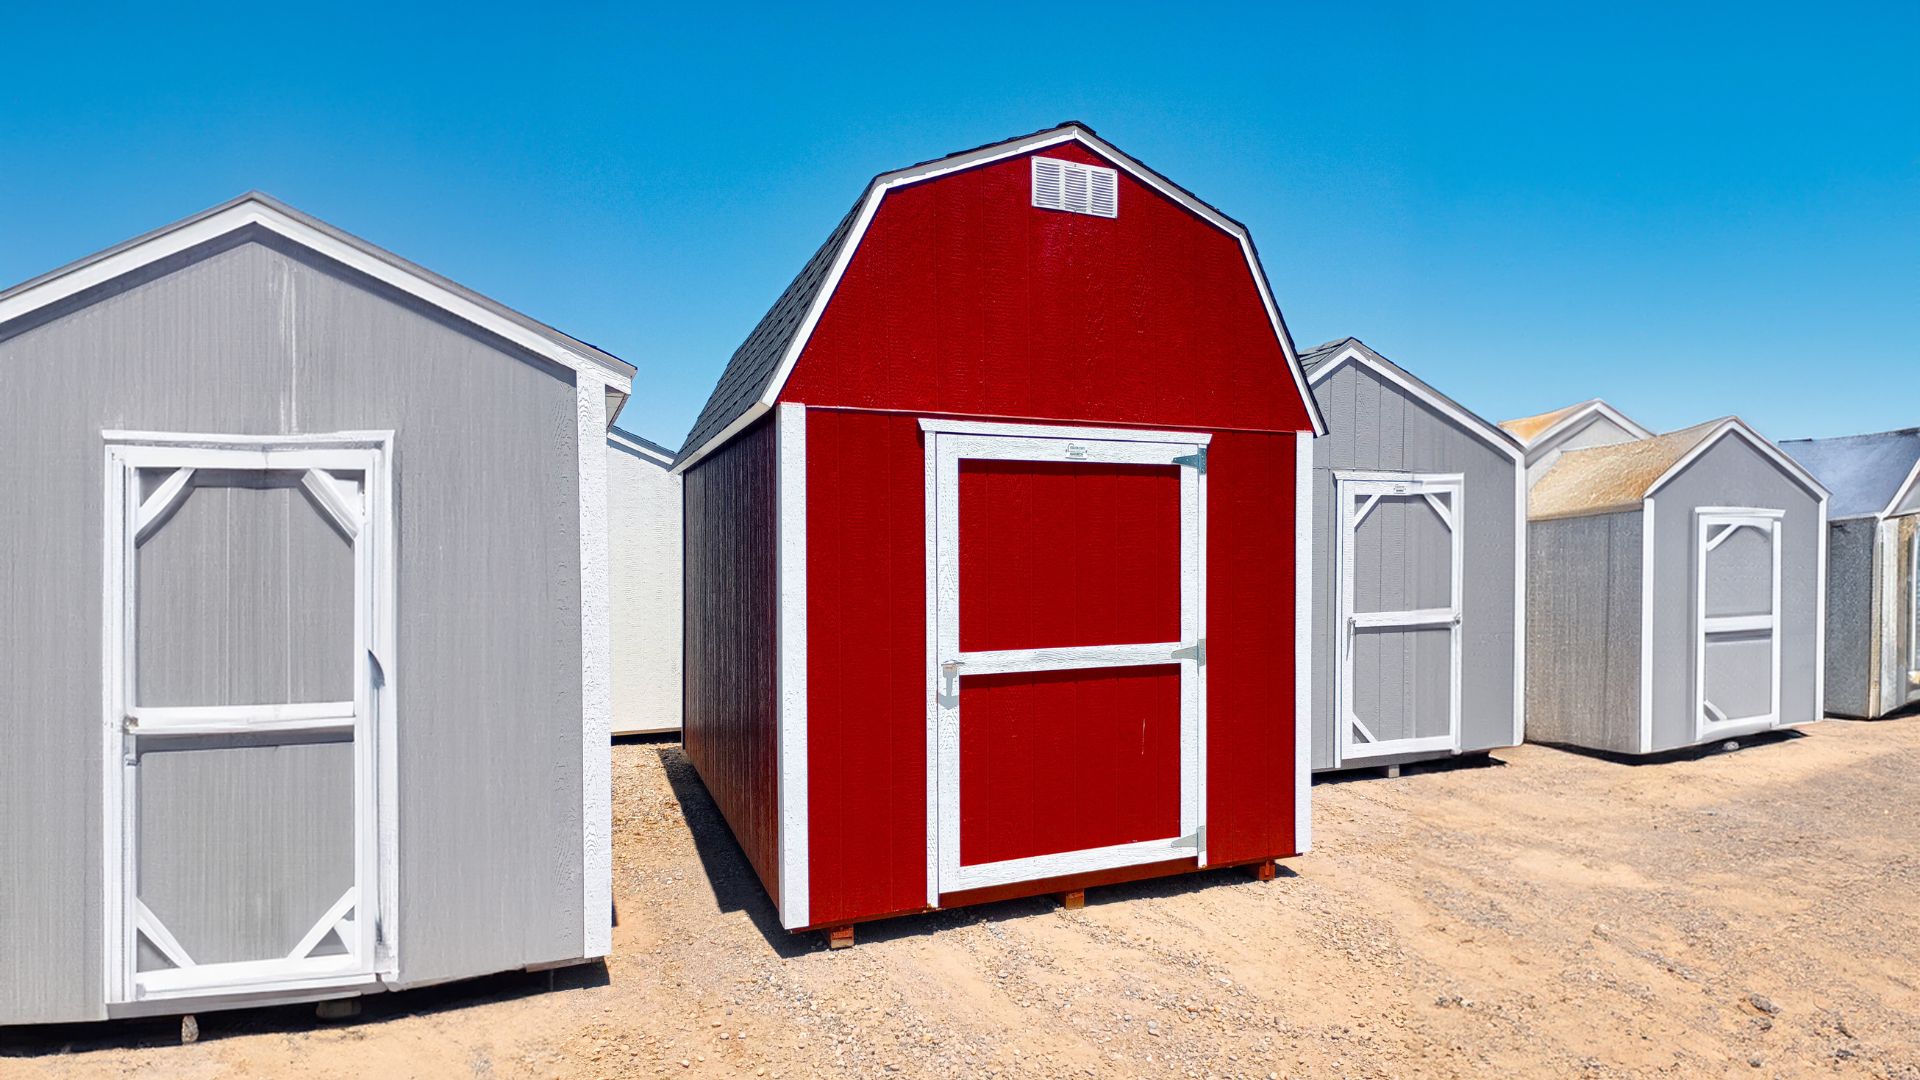 Red Stor-Max shed in shed lot